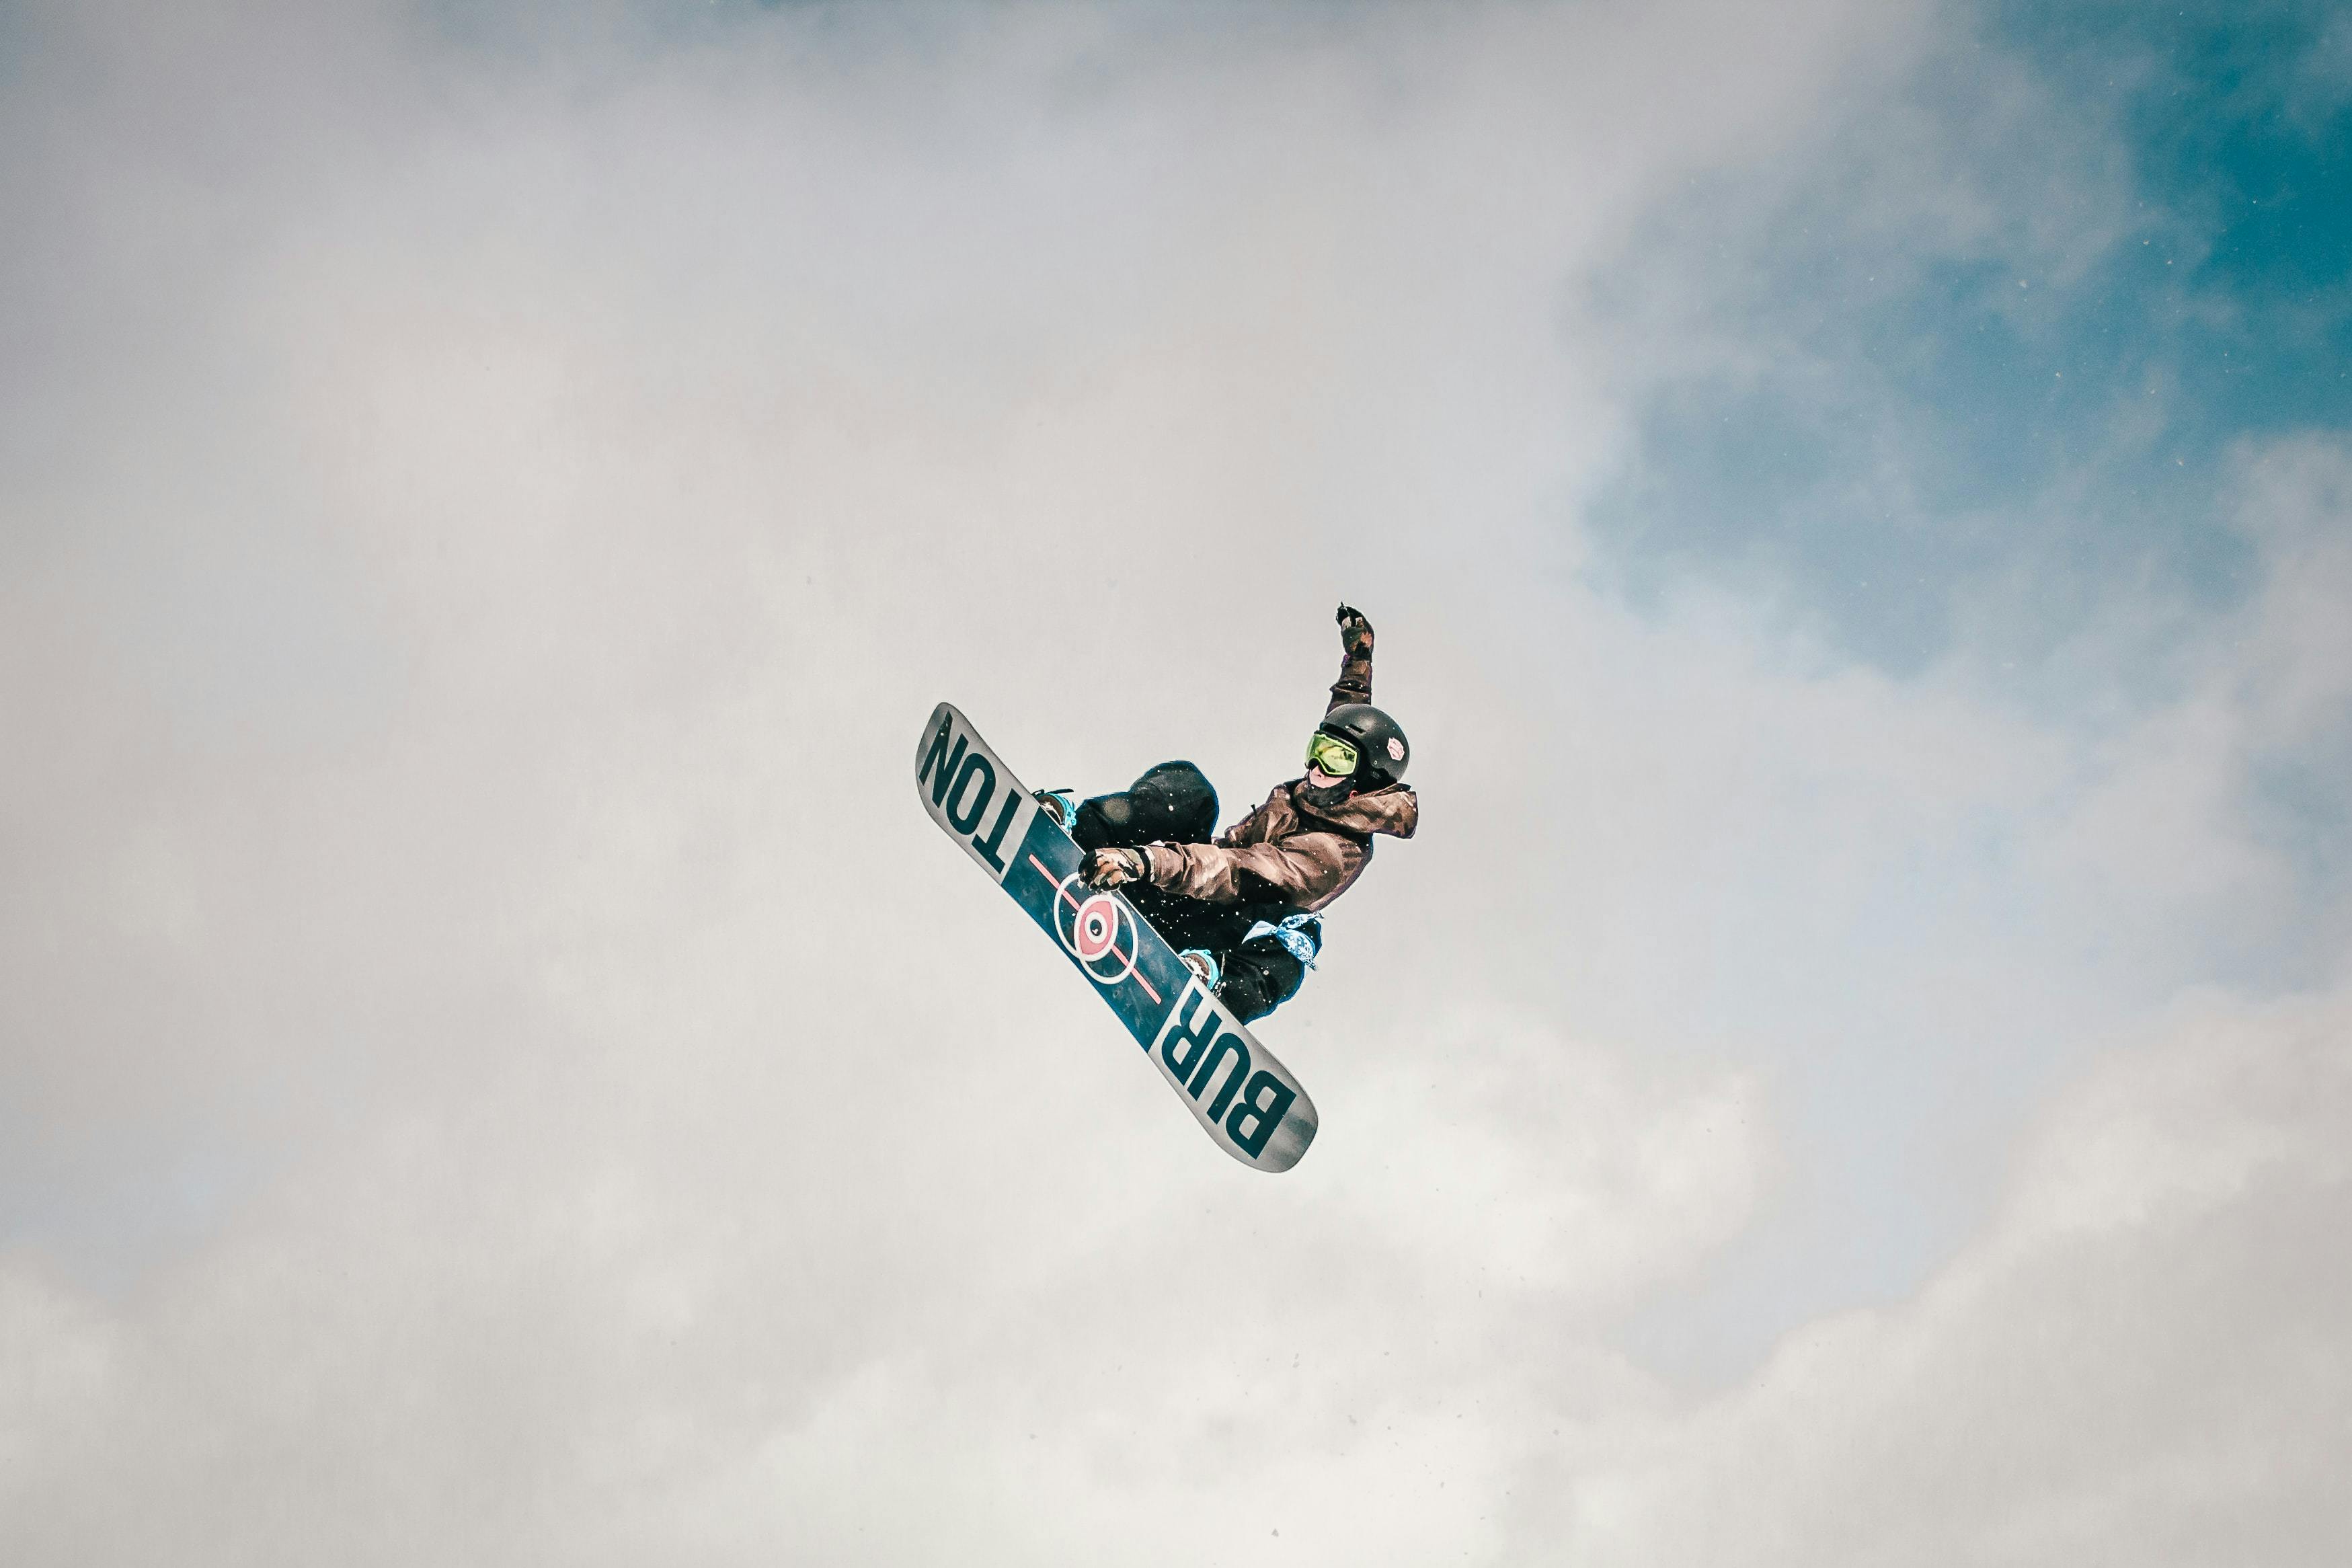 A shot from below of a snowboarder grabbing his snowboard while flying through the air. There is no ground in sight, only the man and his snowboard. He has one hand on the board and one up in the air waving. It is a little cloudy with some blue sky popping out. 